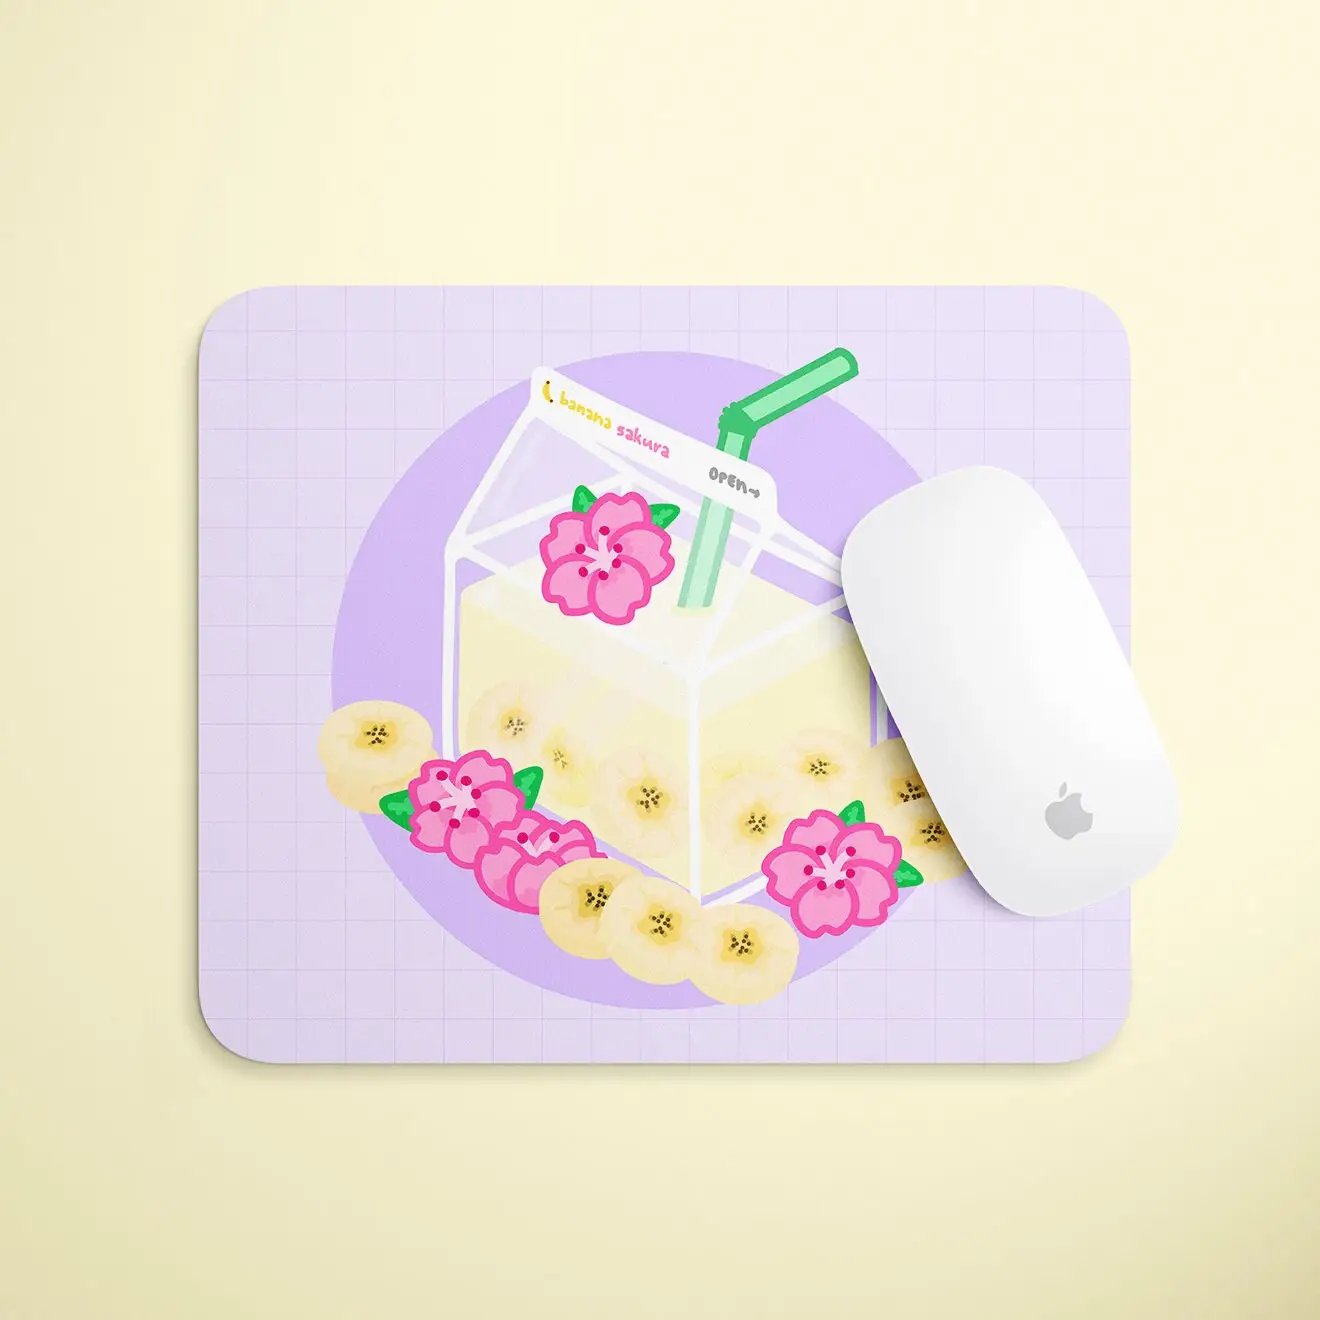 a mouse pad with a glass of milk and banana slices